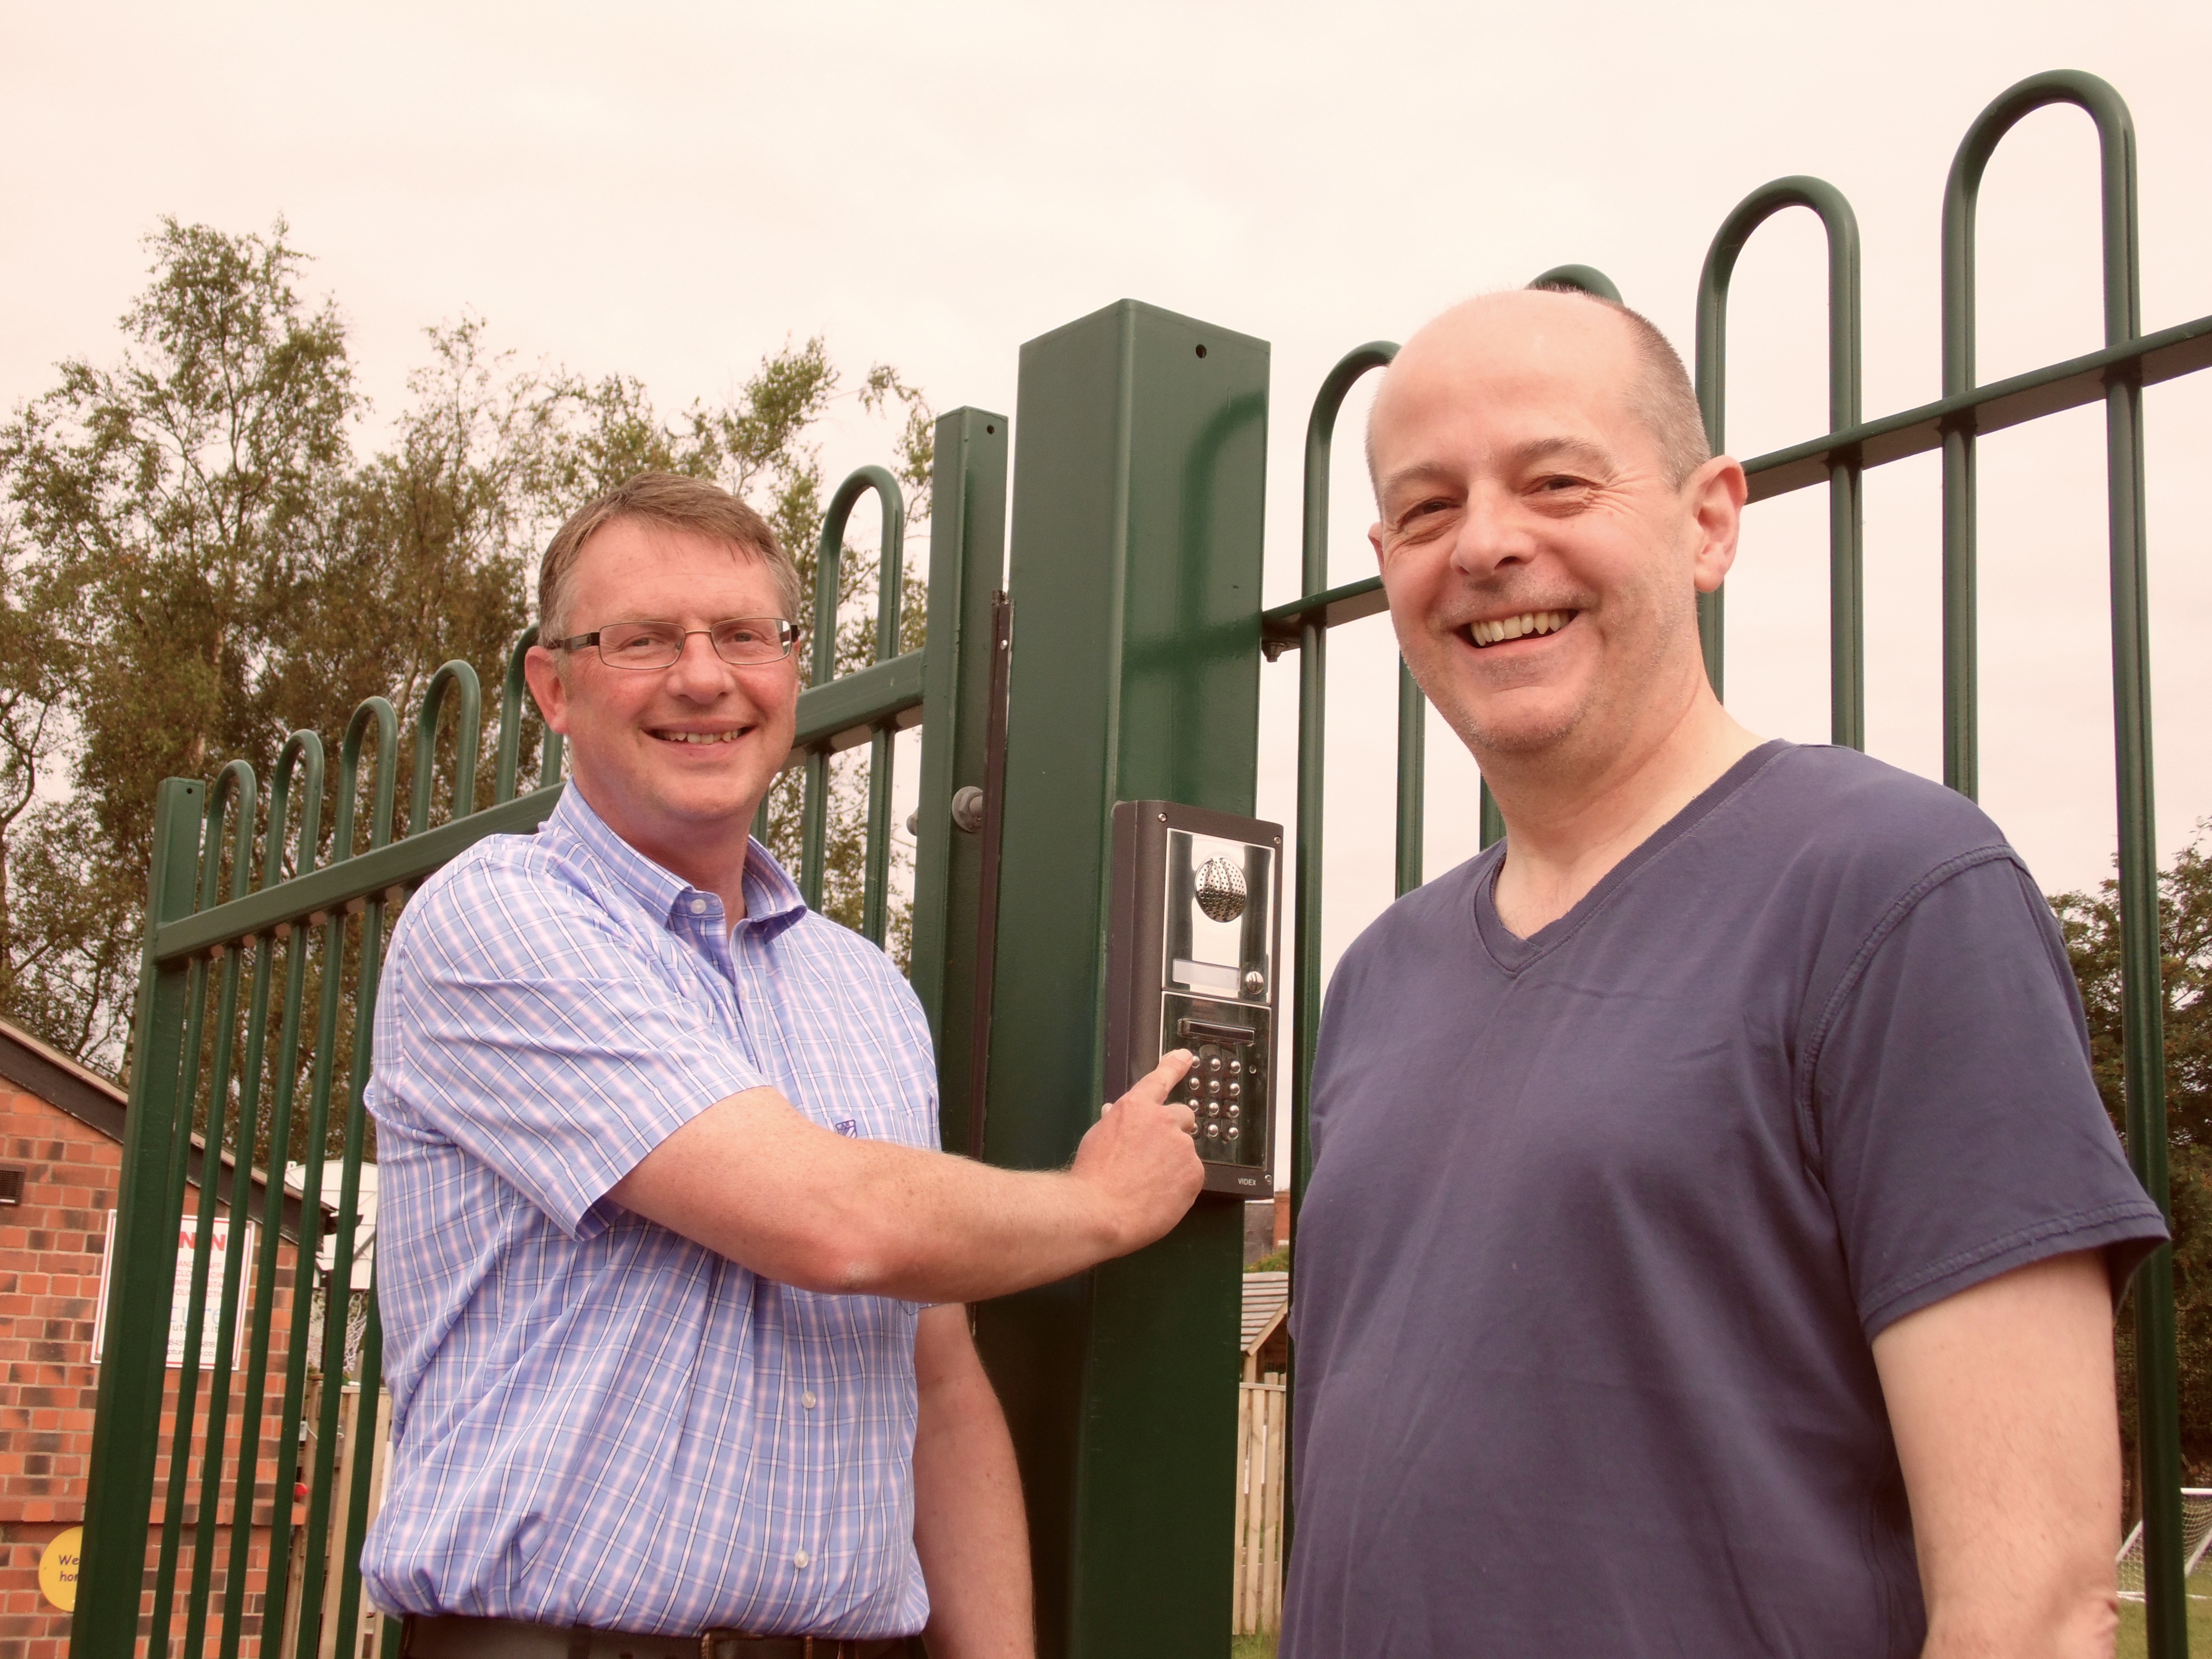 METAL RAILINGS AND AUTOMATED GATES IMPROVE SAFETY FOR SCHOOL